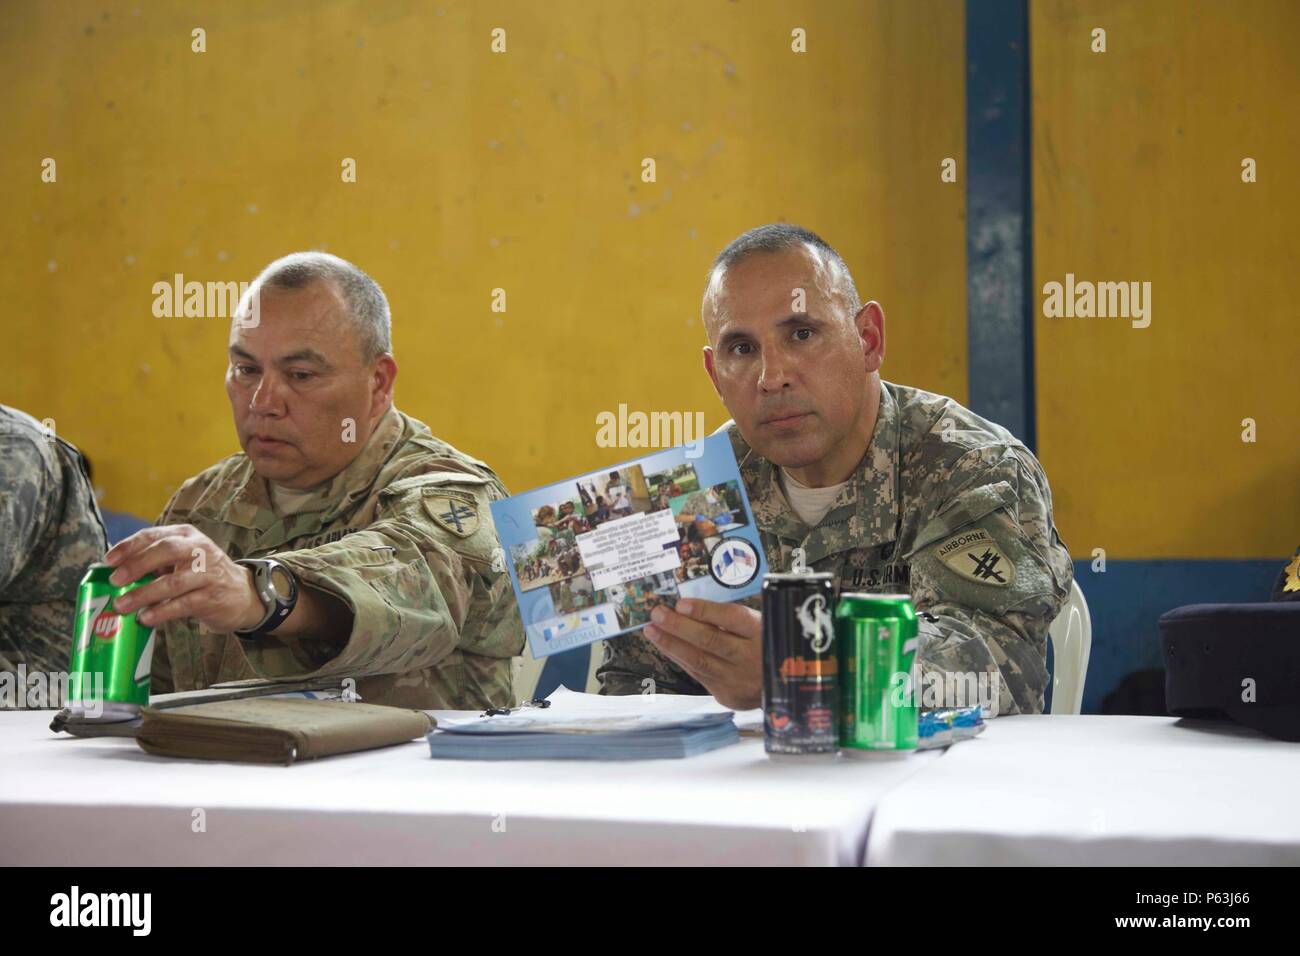 U.S. Army  Sgt. 1st Class Luis Villarreal from the 345th Psychological Operation Company attends a meeting to speak about the future Medical Readiness Exercise as part of the Beyond The Horizon Operation at San Pablo, Guatemala, April 29, 2016. Task Force Red Wolf and Army South conducts Humanitarian Civil Assistance Training to include tactical level construction projects and Medical Readiness Training Exercises providing medical access and building schools in Guatemala with the Guatemalan Government and non-government agencies from 05MAR16 to 18JUN16 in order to improve the mission readiness Stock Photo